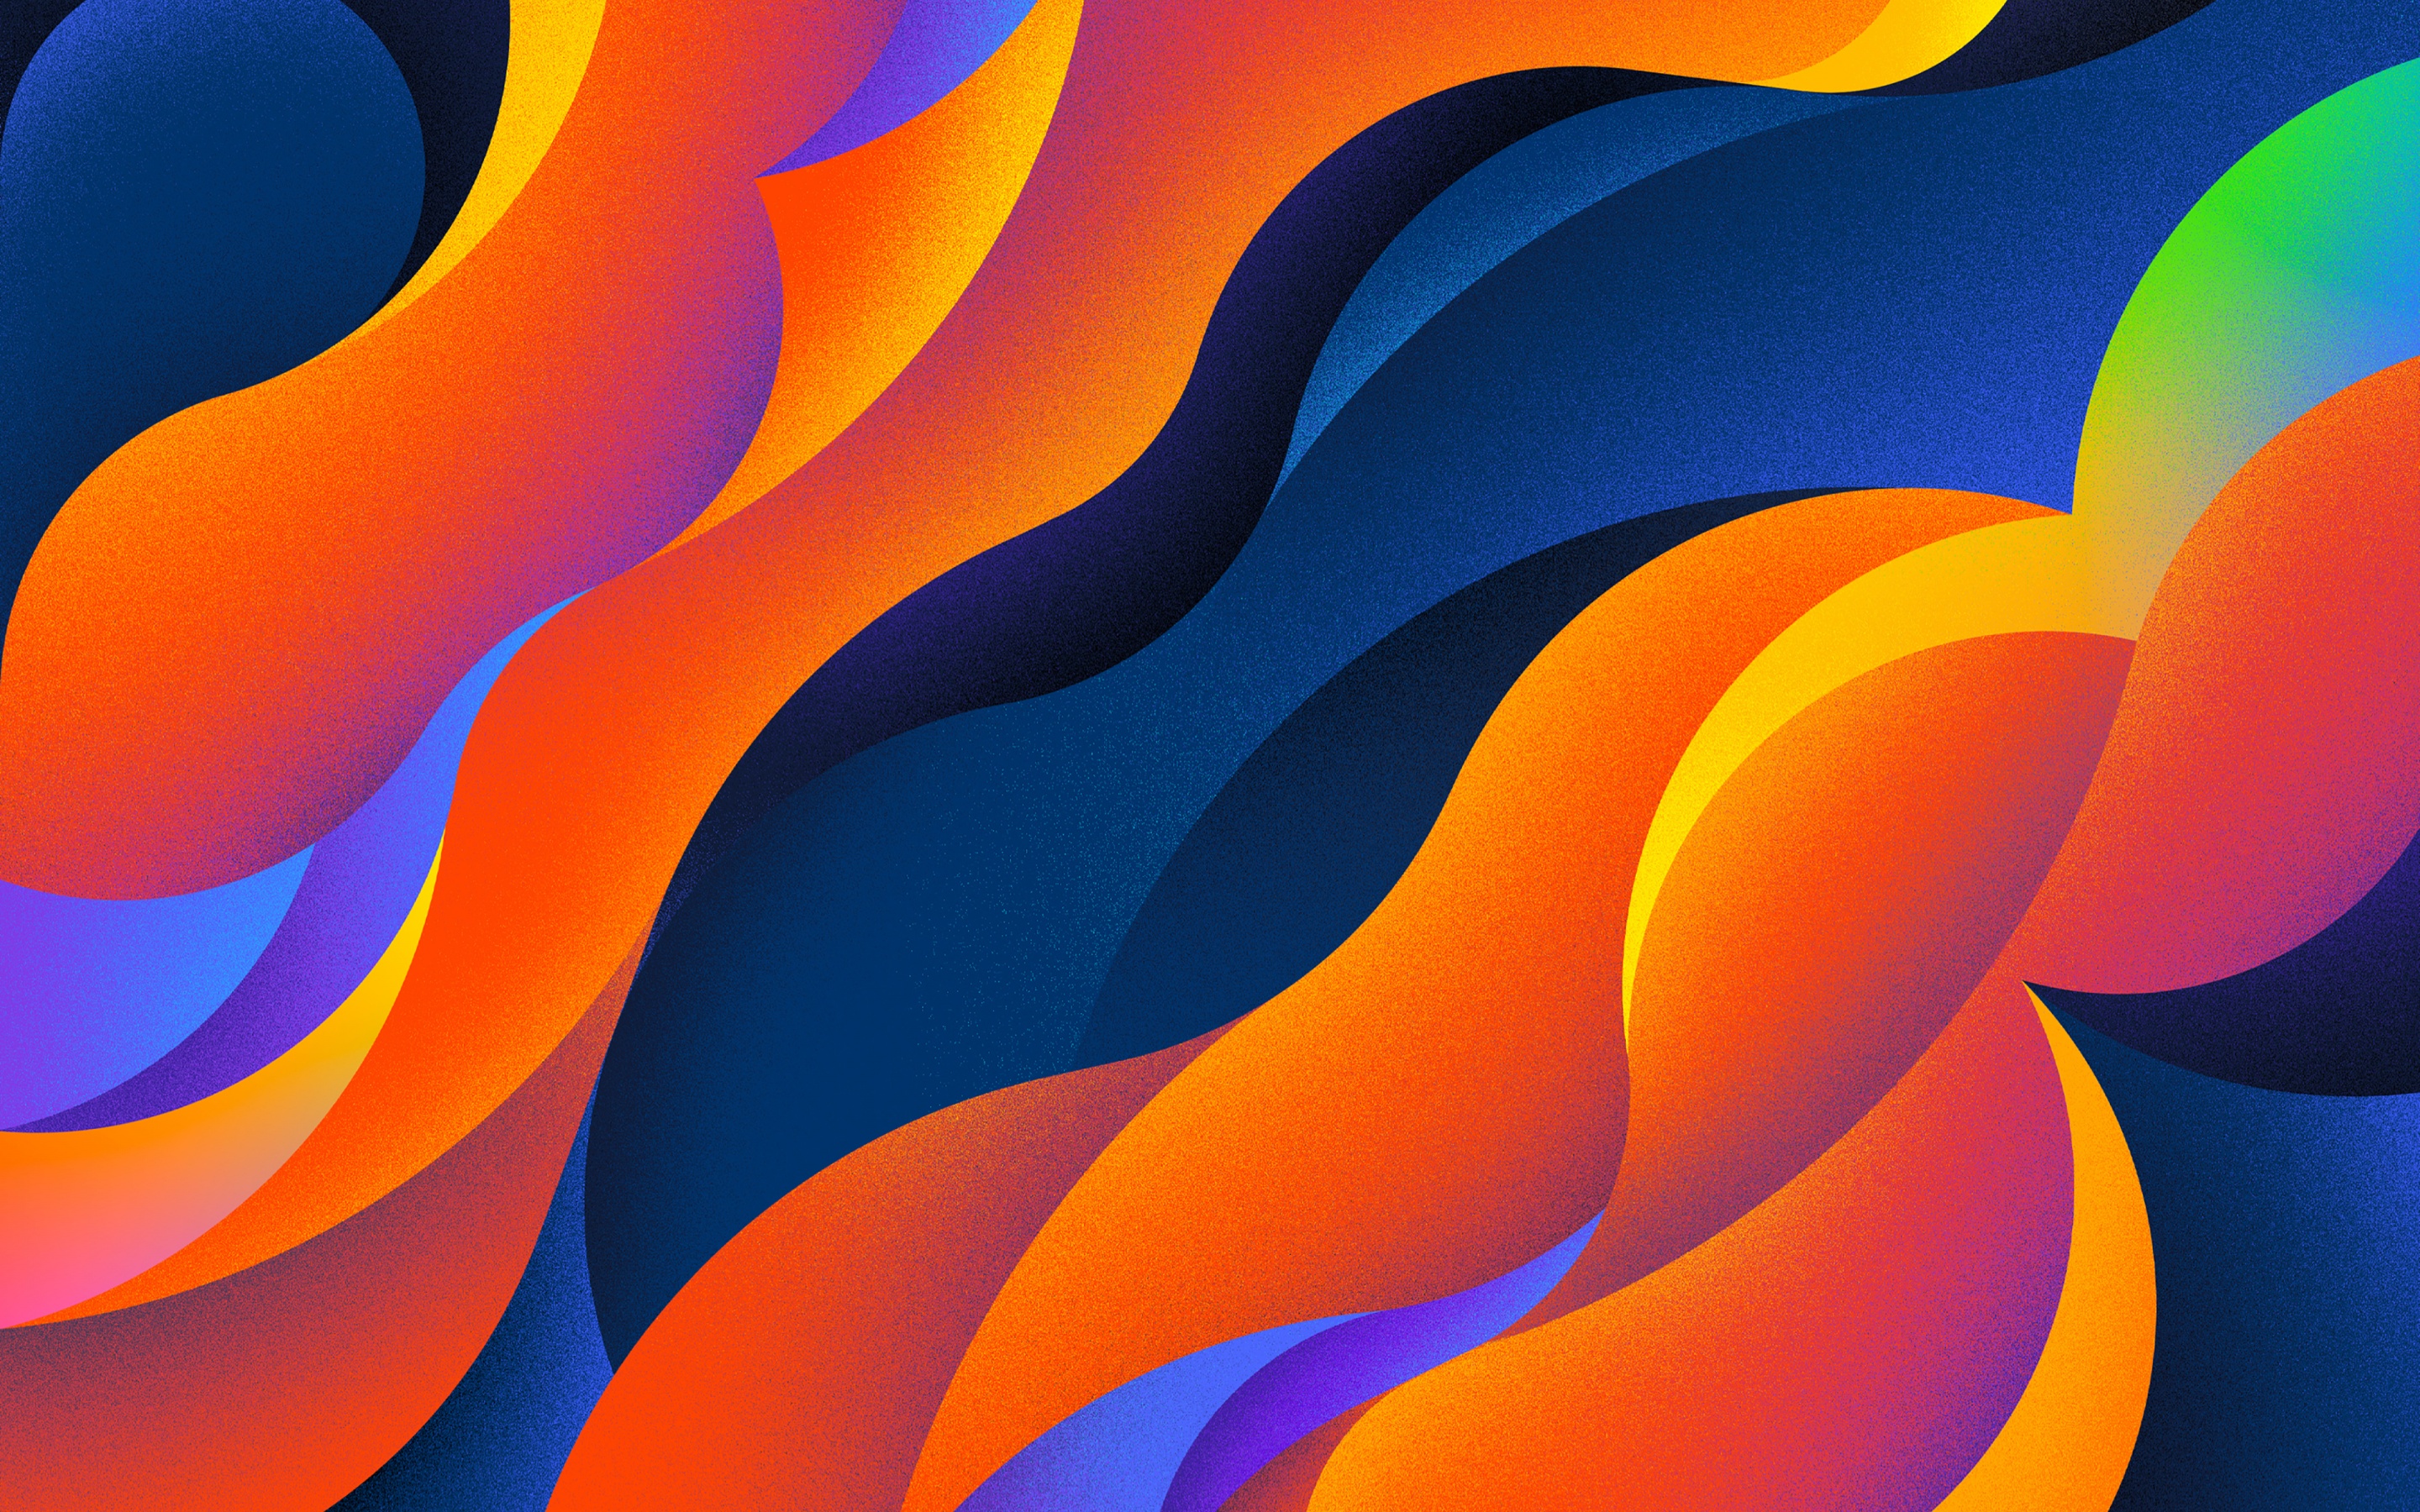 abstract orange backgrounds